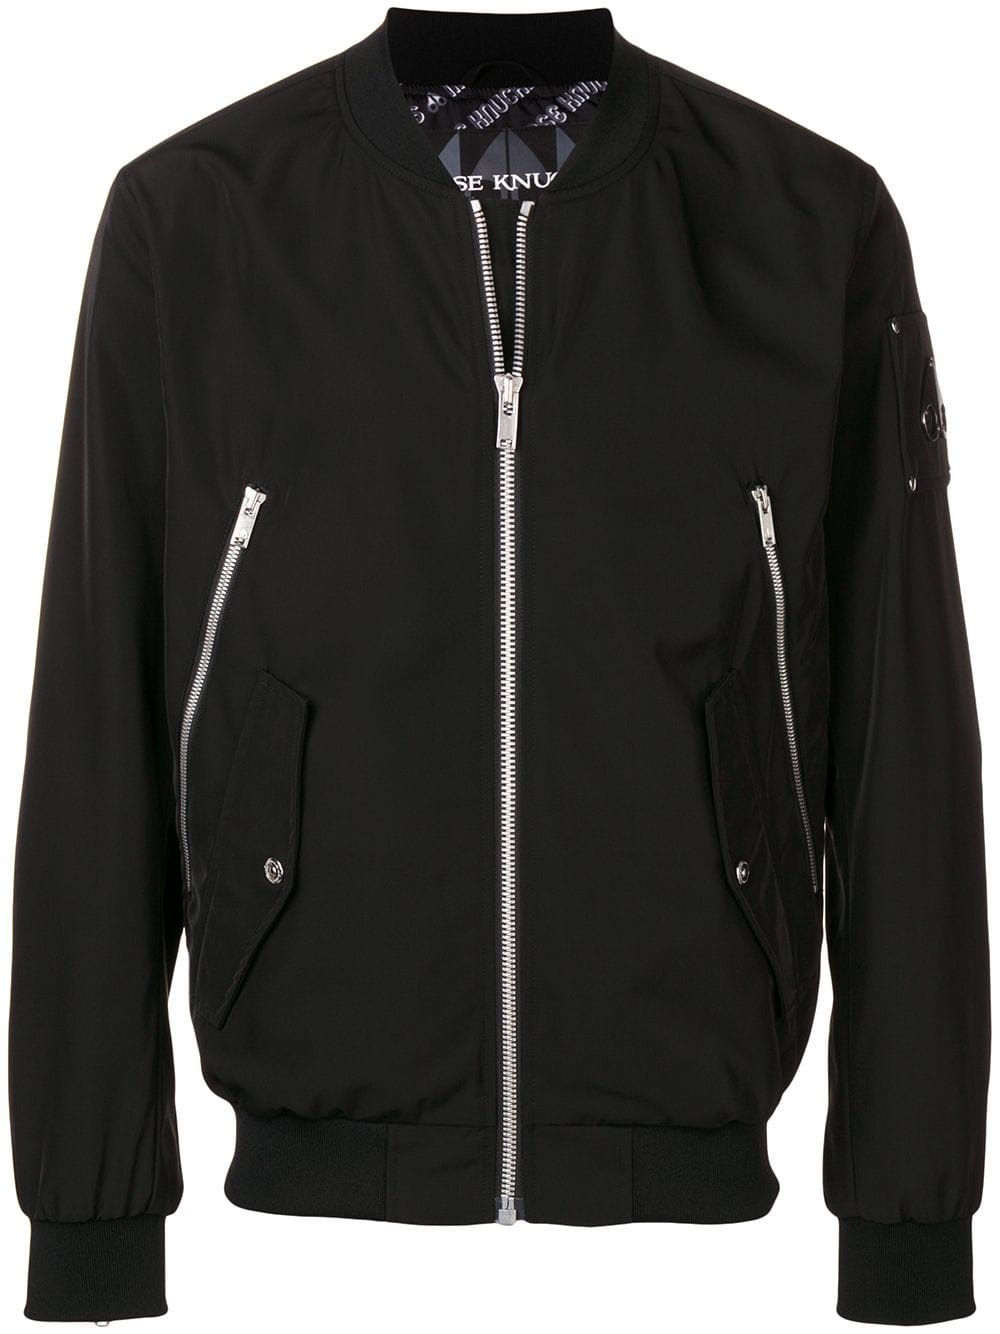 moose knuckles CONCORDE JACKET available on montiboutique.com - 27285